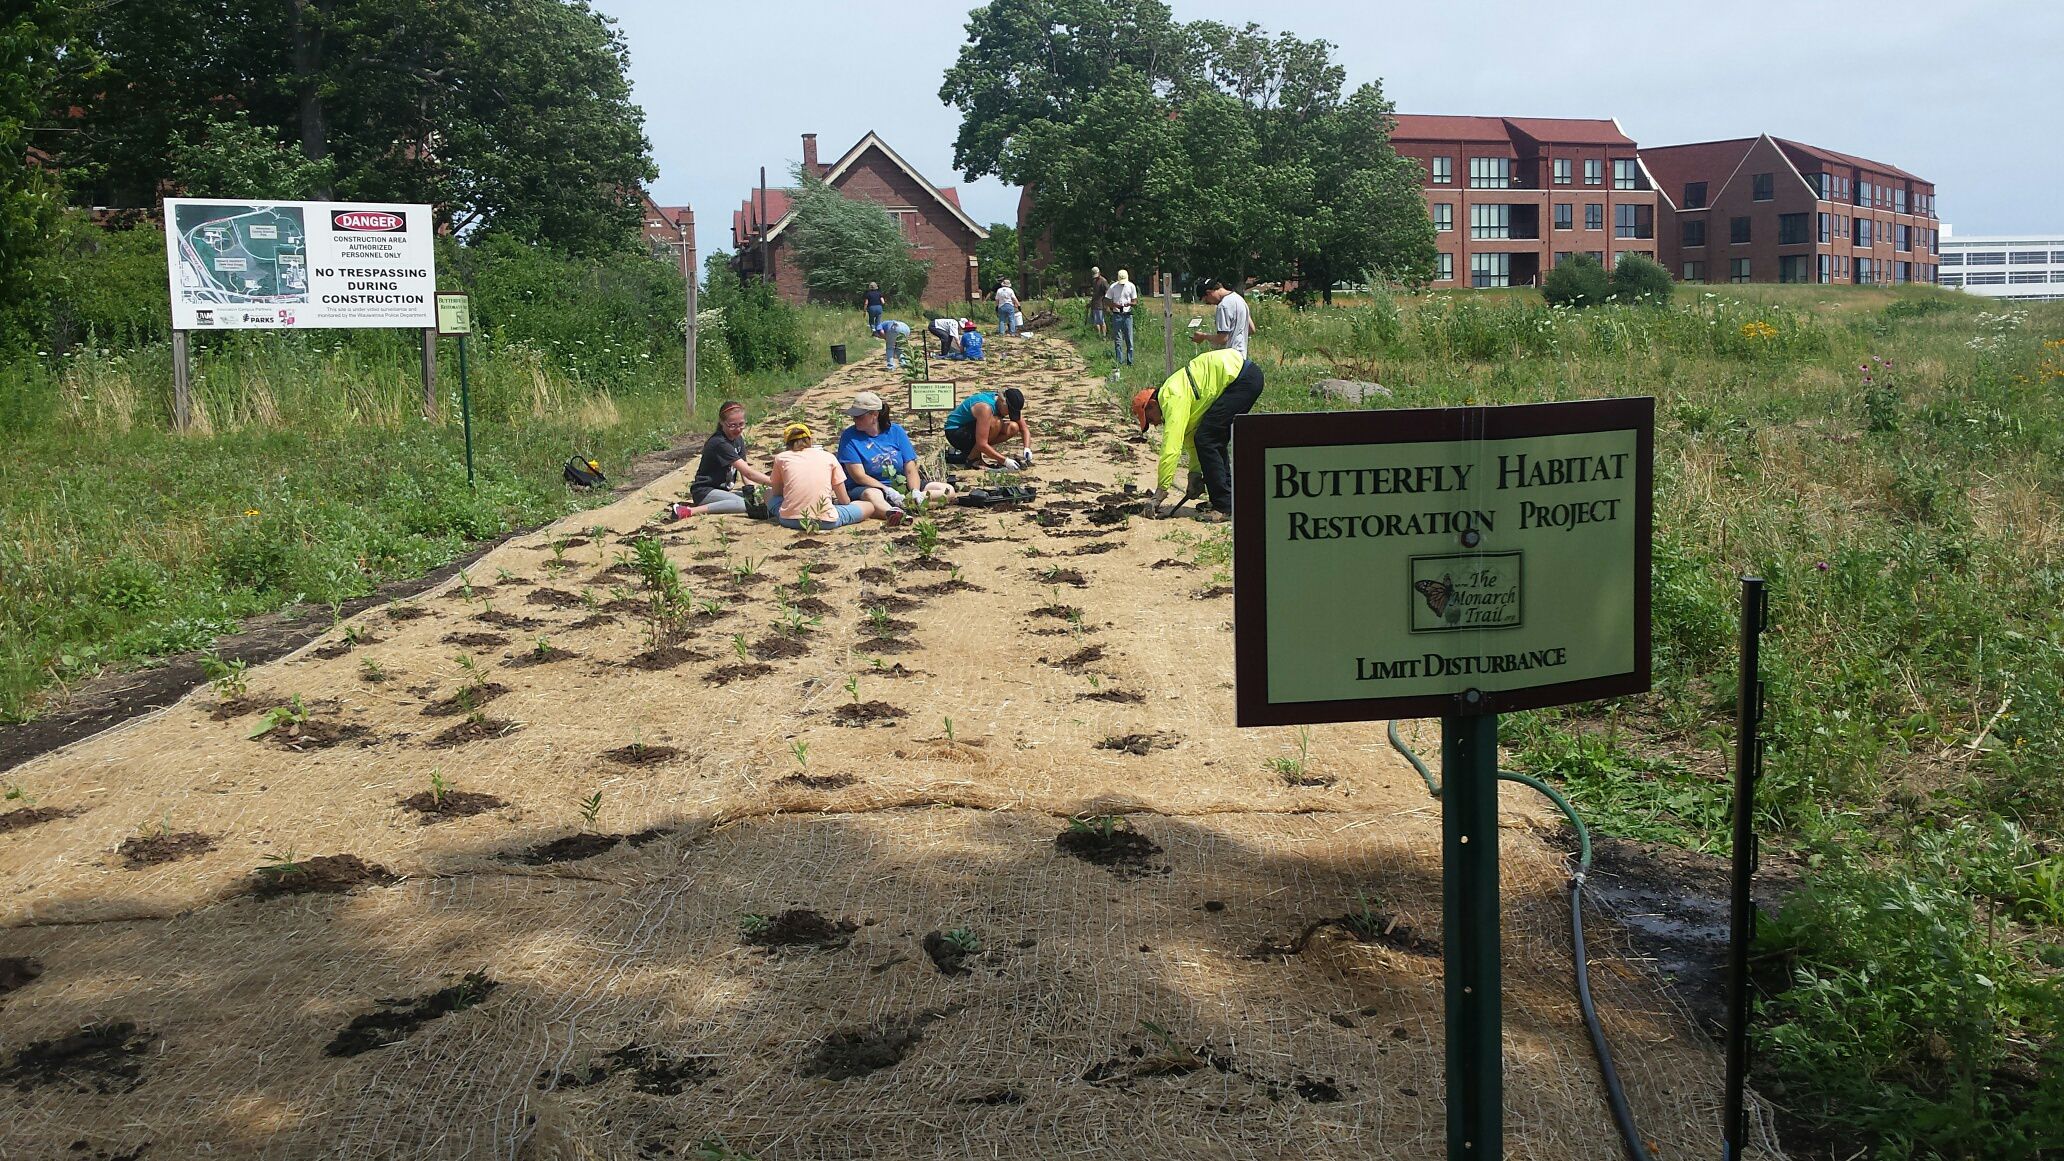 Members of Friends of the Monarch Trail plant butterfly-friendly plants in Wauwatosa.